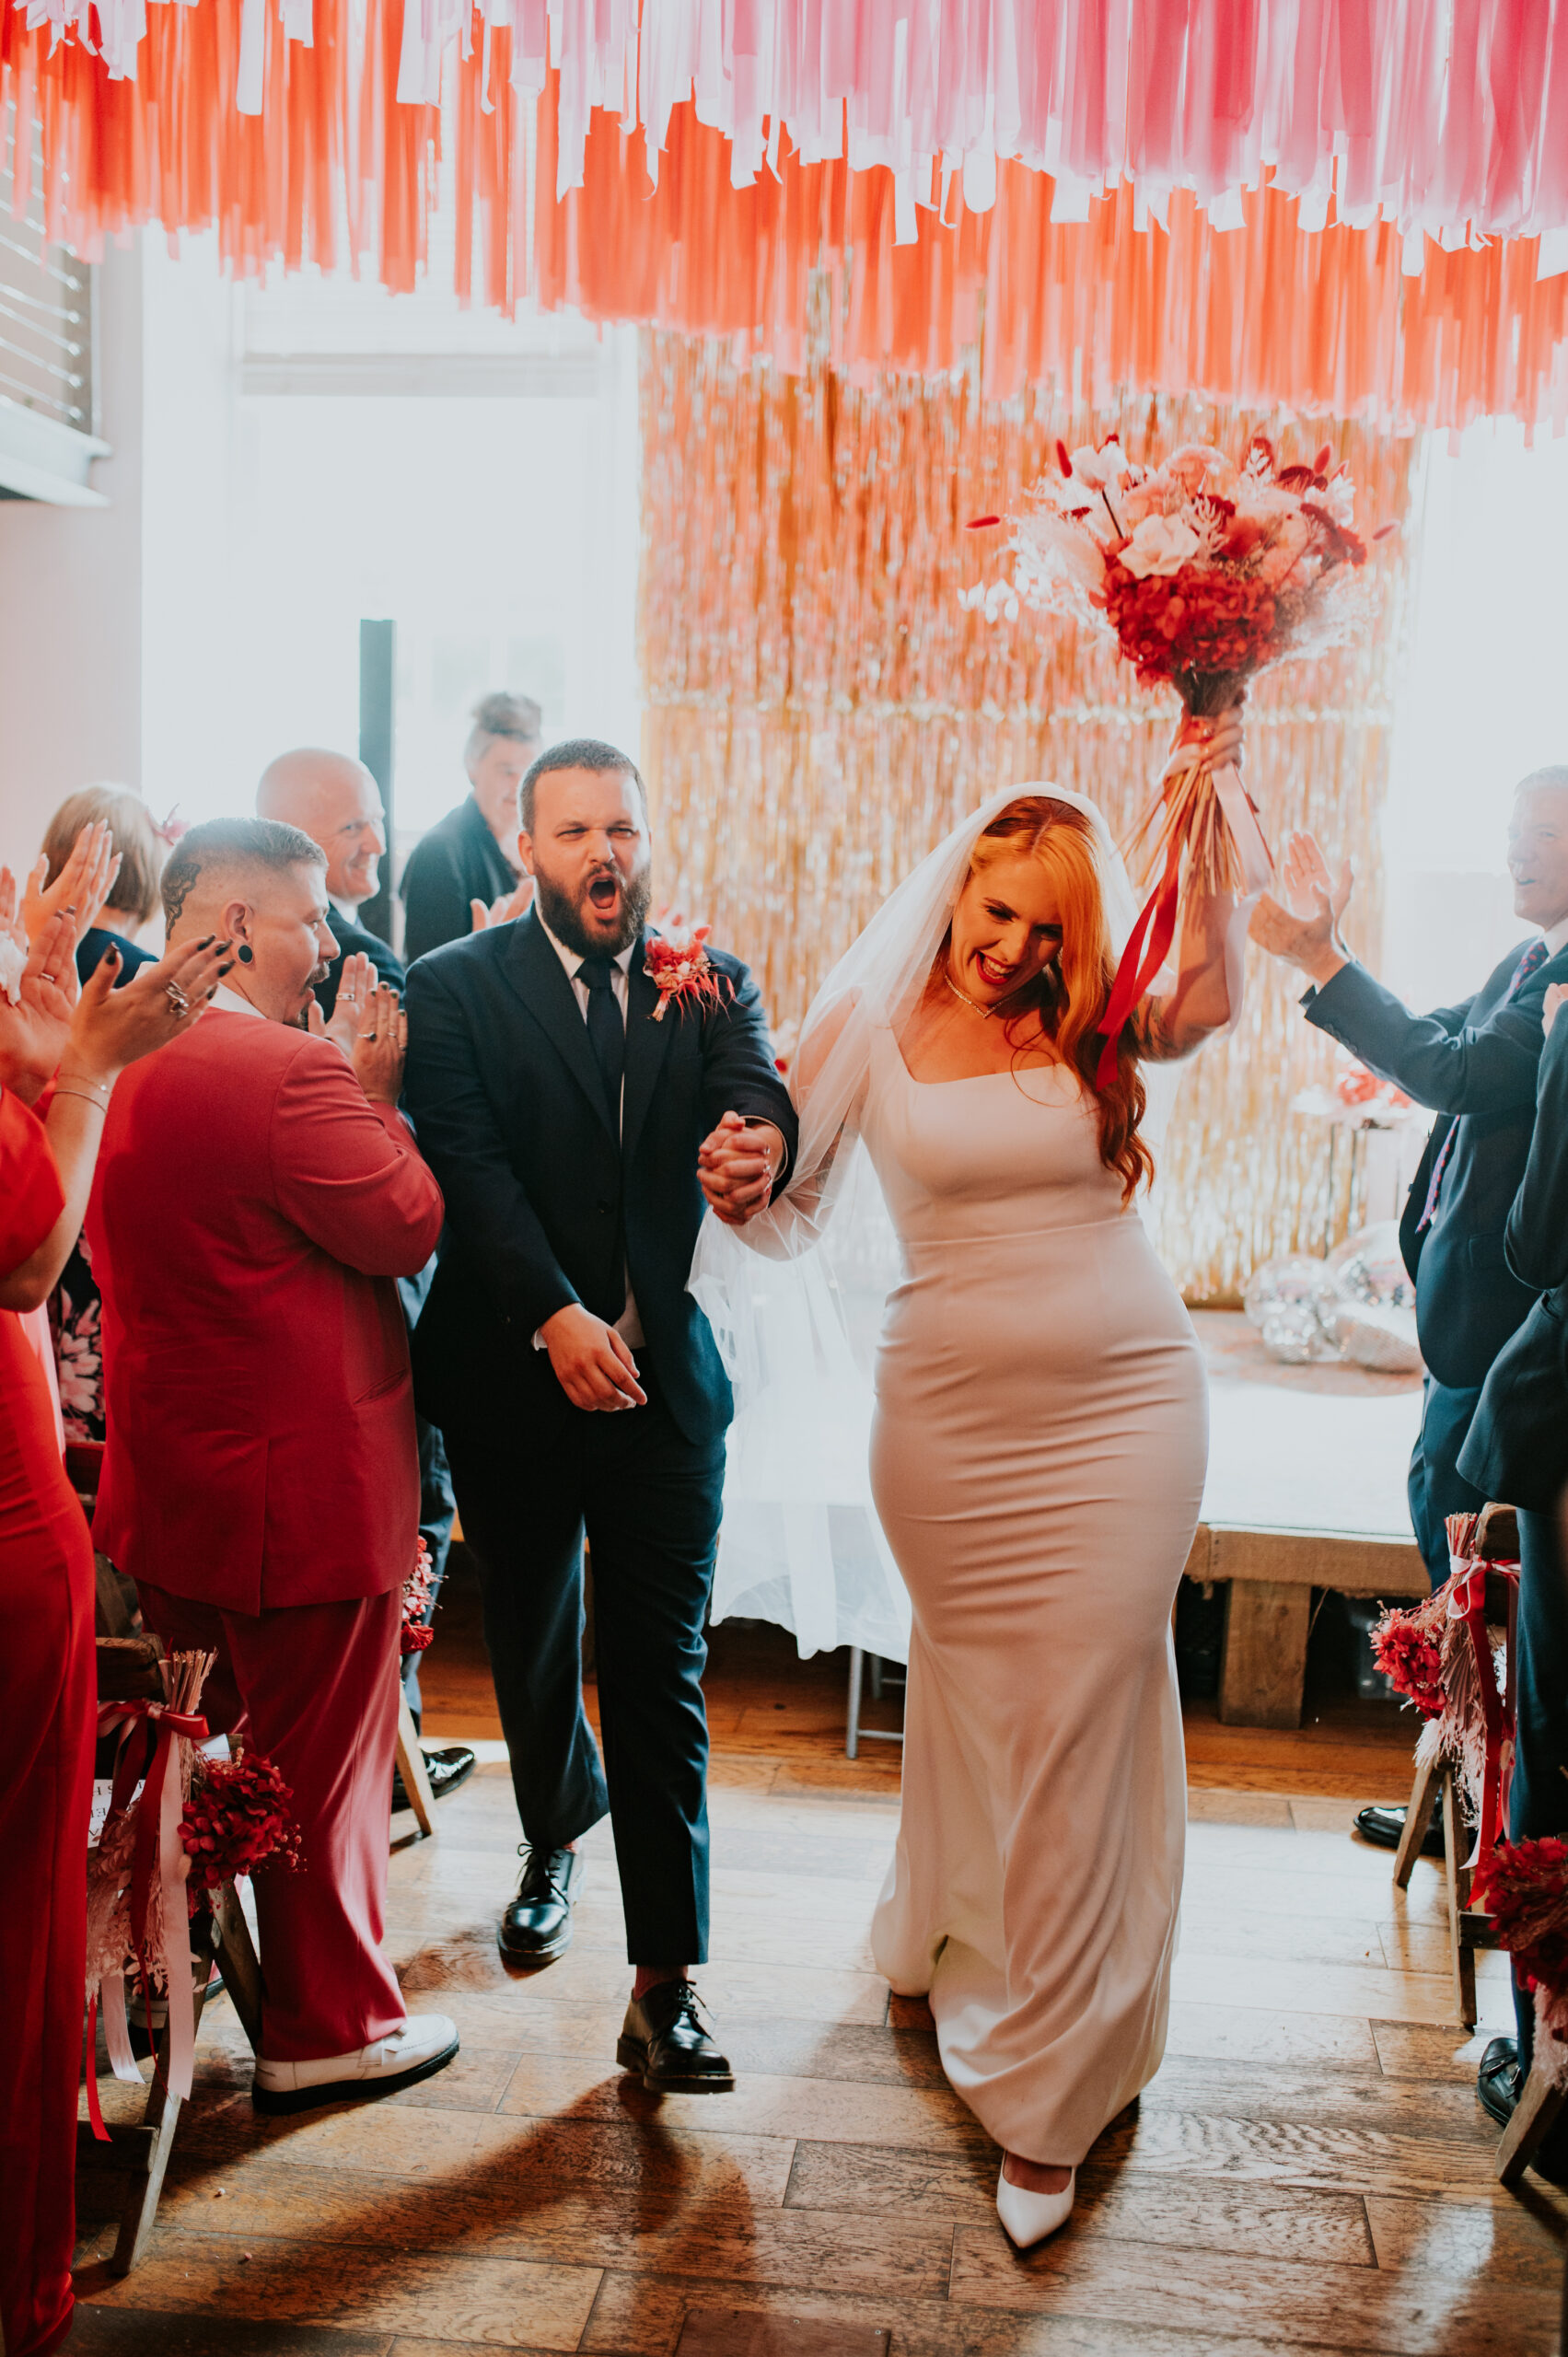 Radiant Red and Pretty Pink Wedding at The Globe in Hay: A Love-Filled Affair to Remember